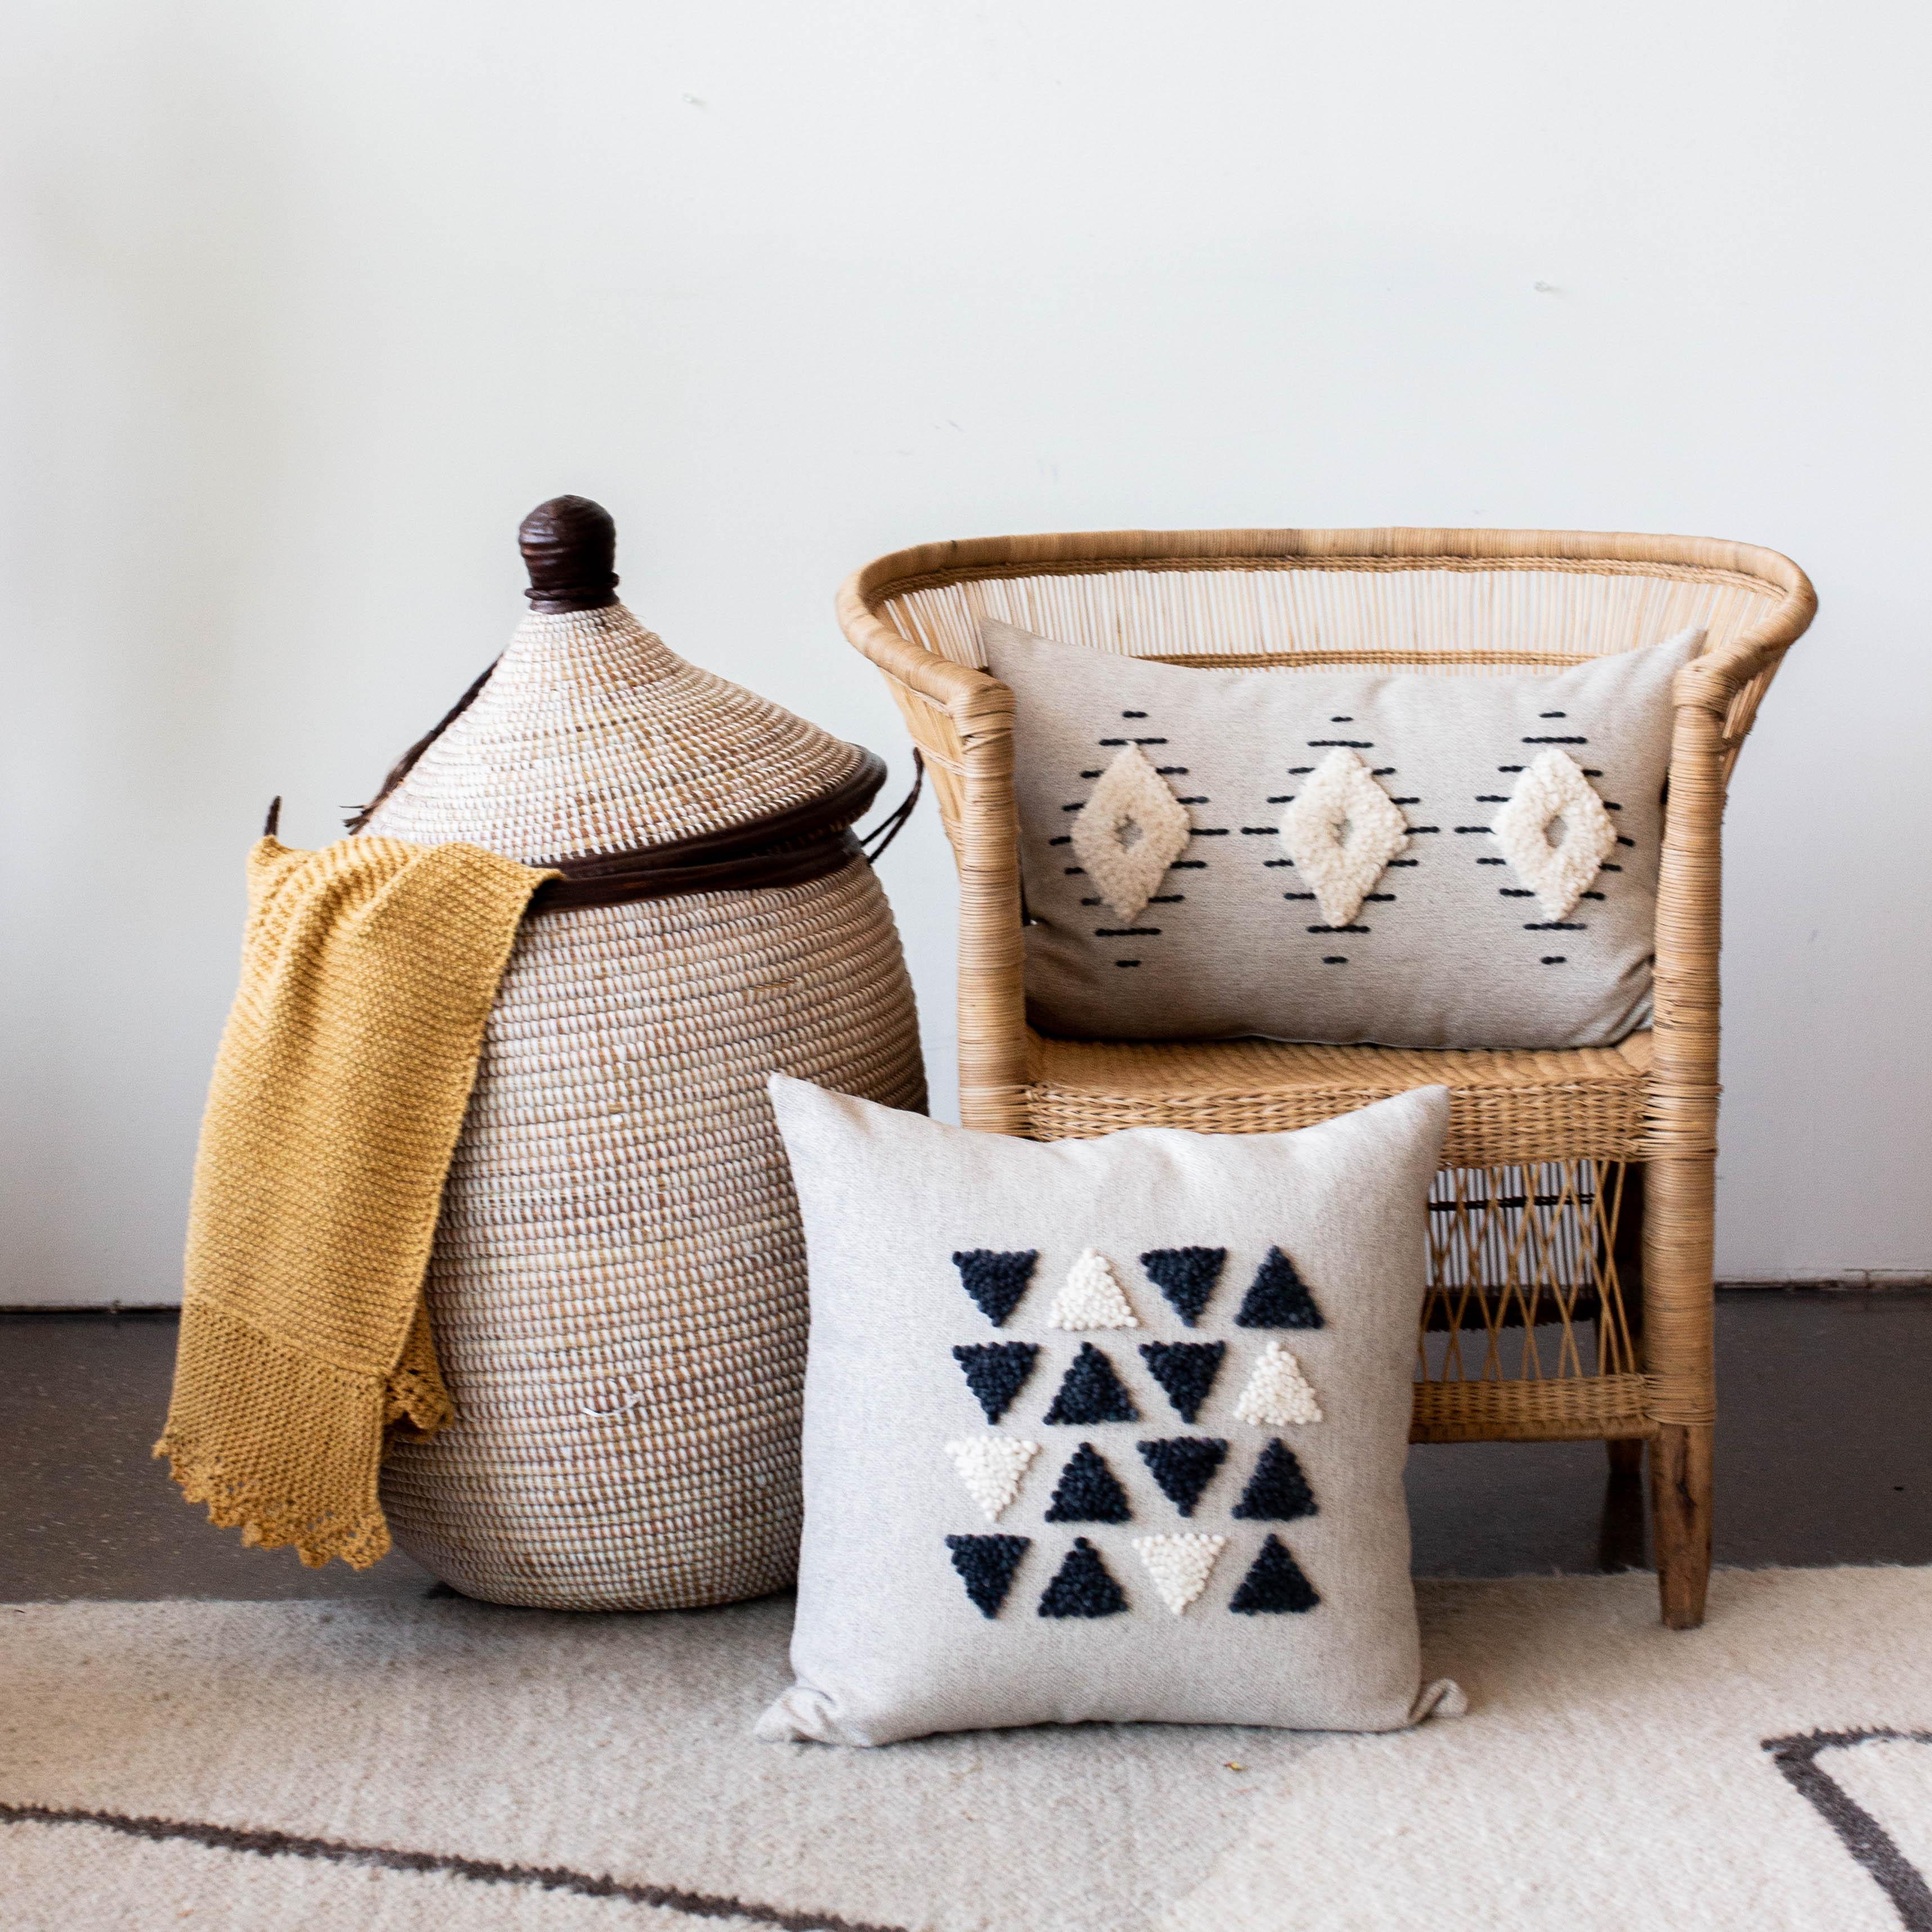 AfriScandi Harvest Pillow kanju interiors African décor handmade natural organic color accent pillow cushion throw decorative lounge comfortable comfy unique modern contemporary stylish soft accent durable minimal couch chair bed handmade luxury thick plush yarn texture punch needle knitting simplicity original embroidered South Africa quality cotton cream black white triangles geometric